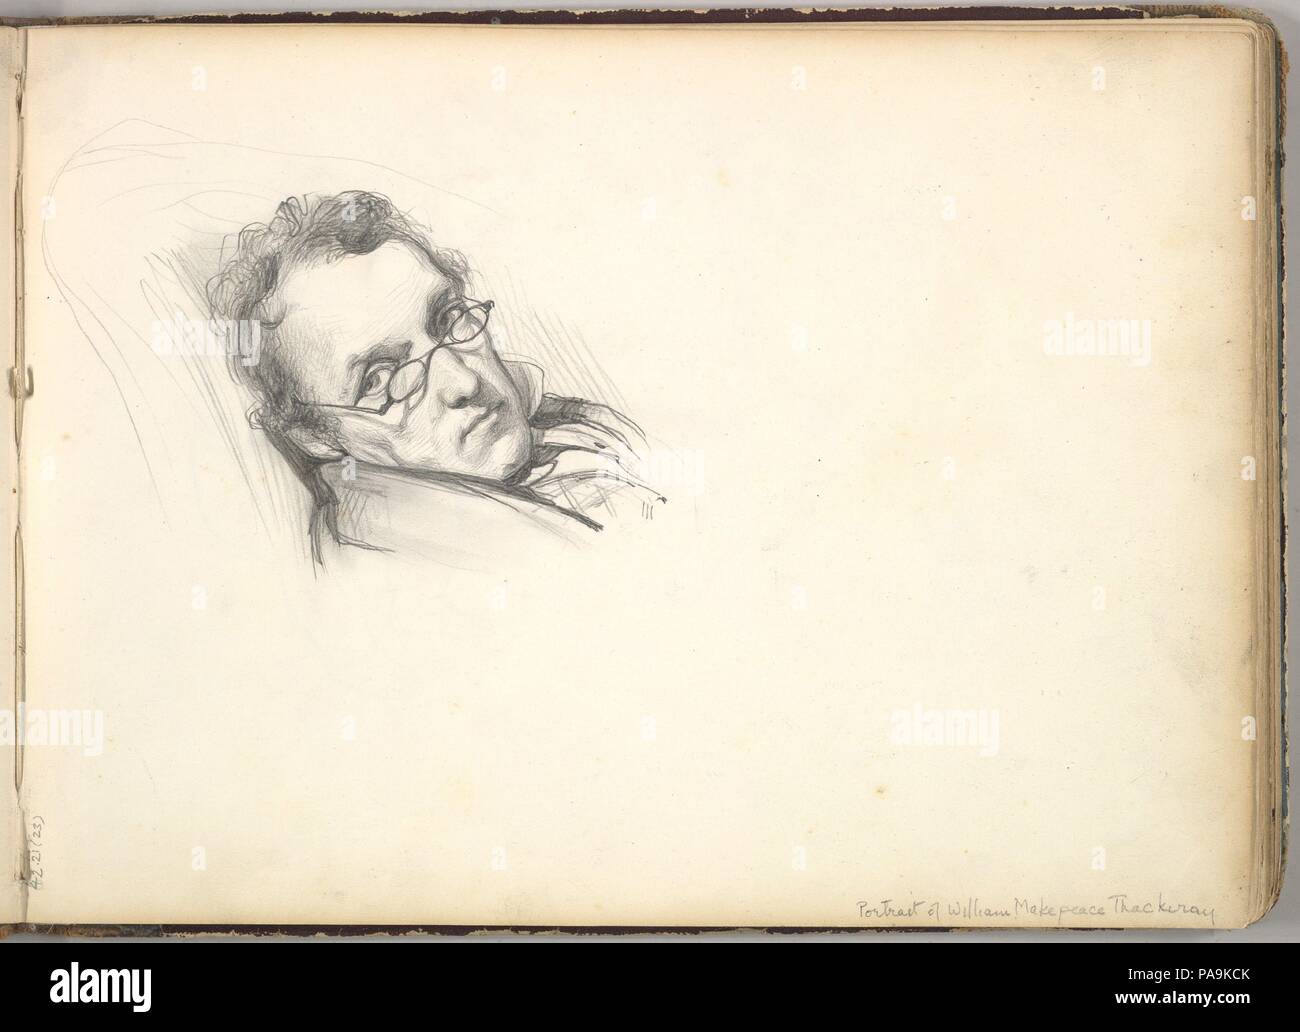 William Makepeace Thackeray (in Sketch Book With Drawings on Twenty-six Leaves). Artist: Frederic, Lord Leighton (British, Scarborough 1830-1896 London). Dimensions: Sheet (page): 7 7/8 x 10 7/8 in. (20 x 27.6 cm). Date: ca. 1850. Museum: Metropolitan Museum of Art, New York, USA. Stock Photo